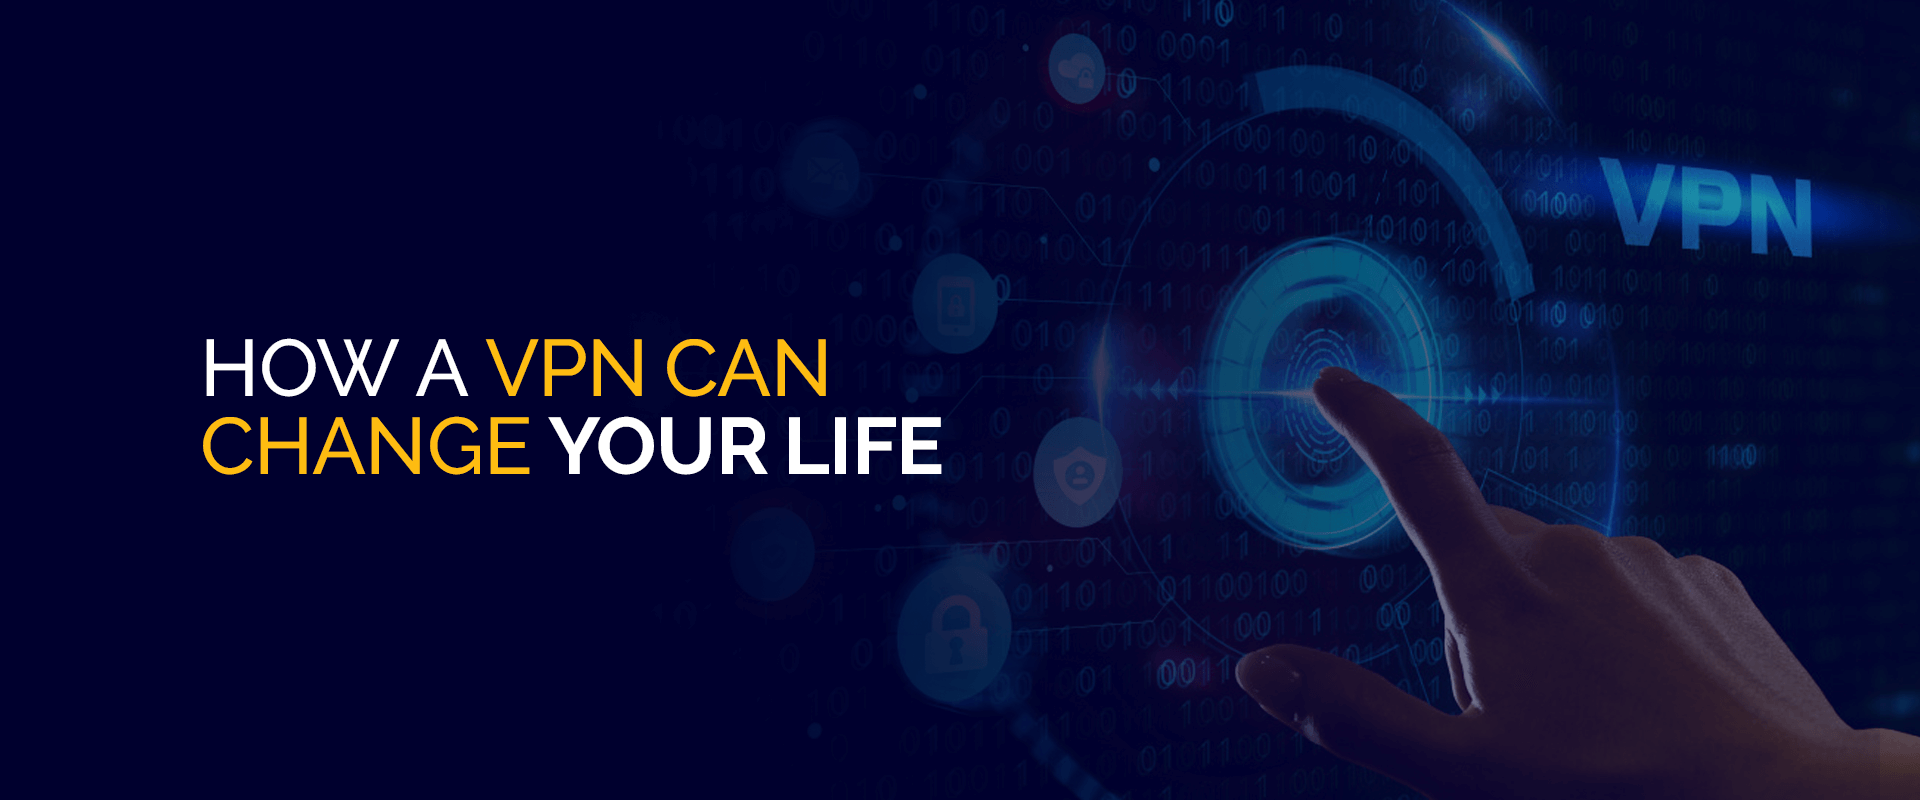 How a VPN Can Change Your Life